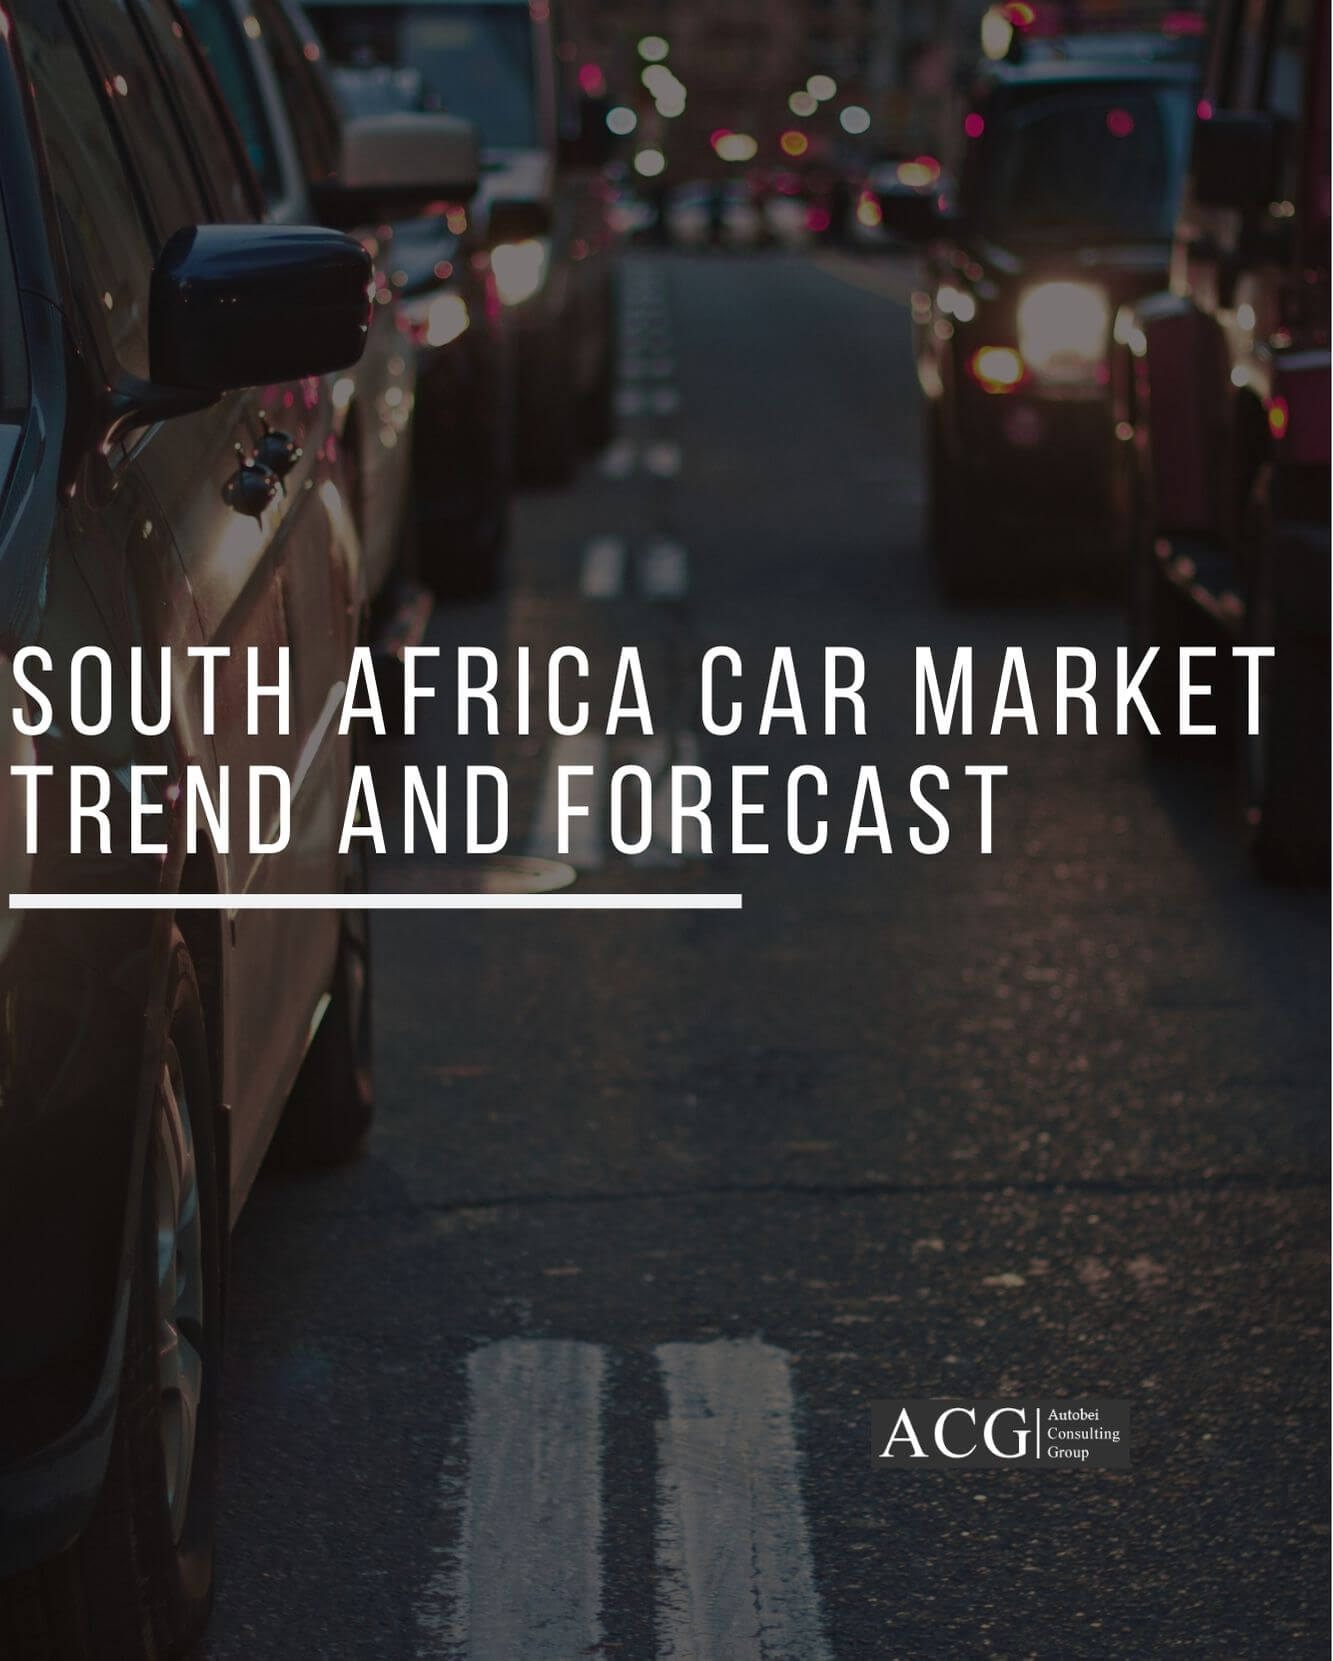 South Africa Market Analysis and Outlook